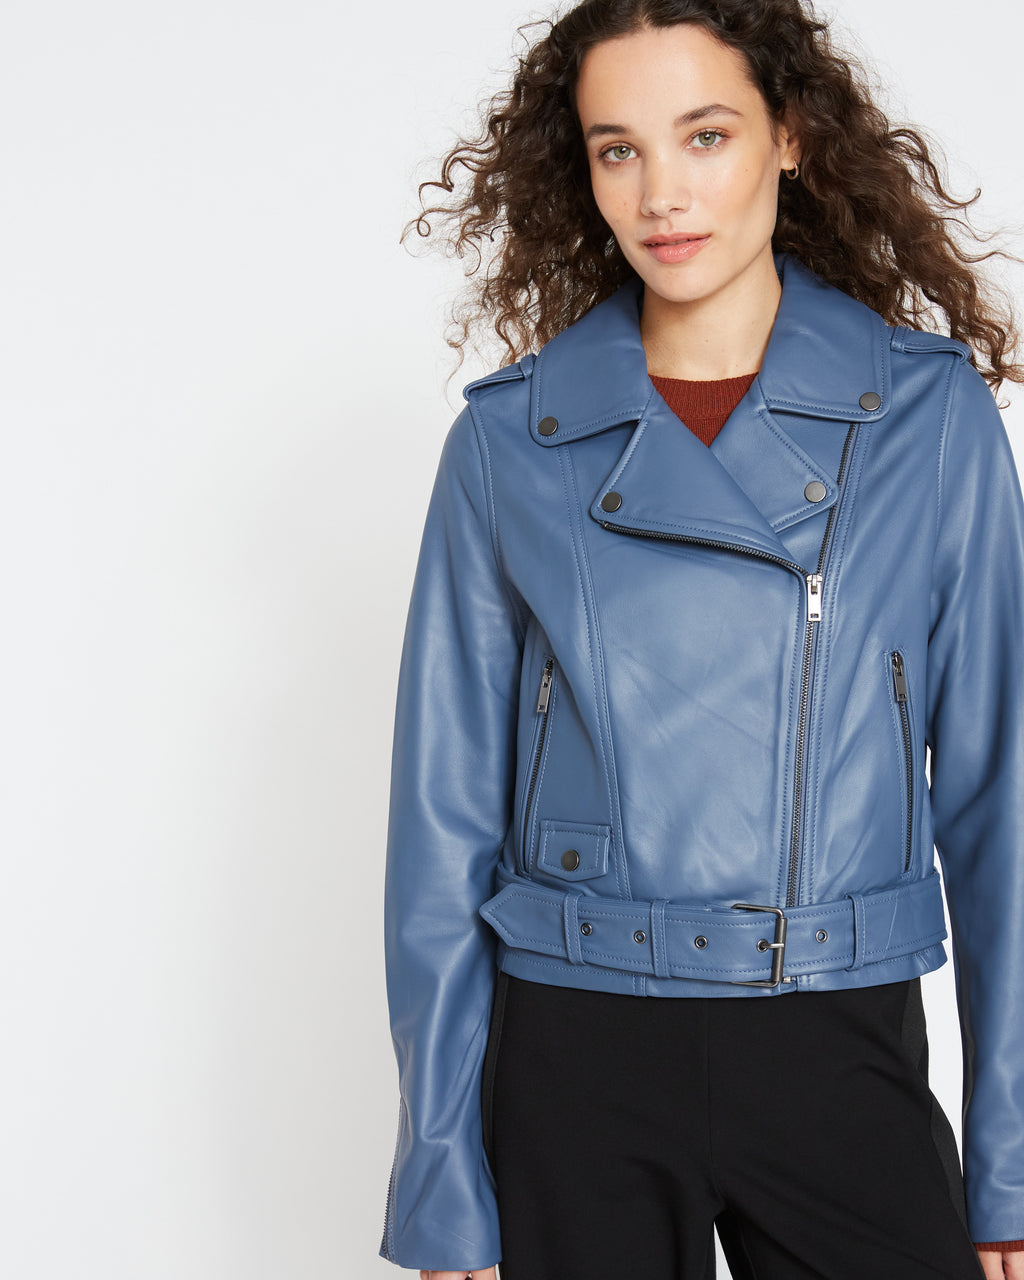 Leather Jackets for Women - Genuine Leather | Universal Standard